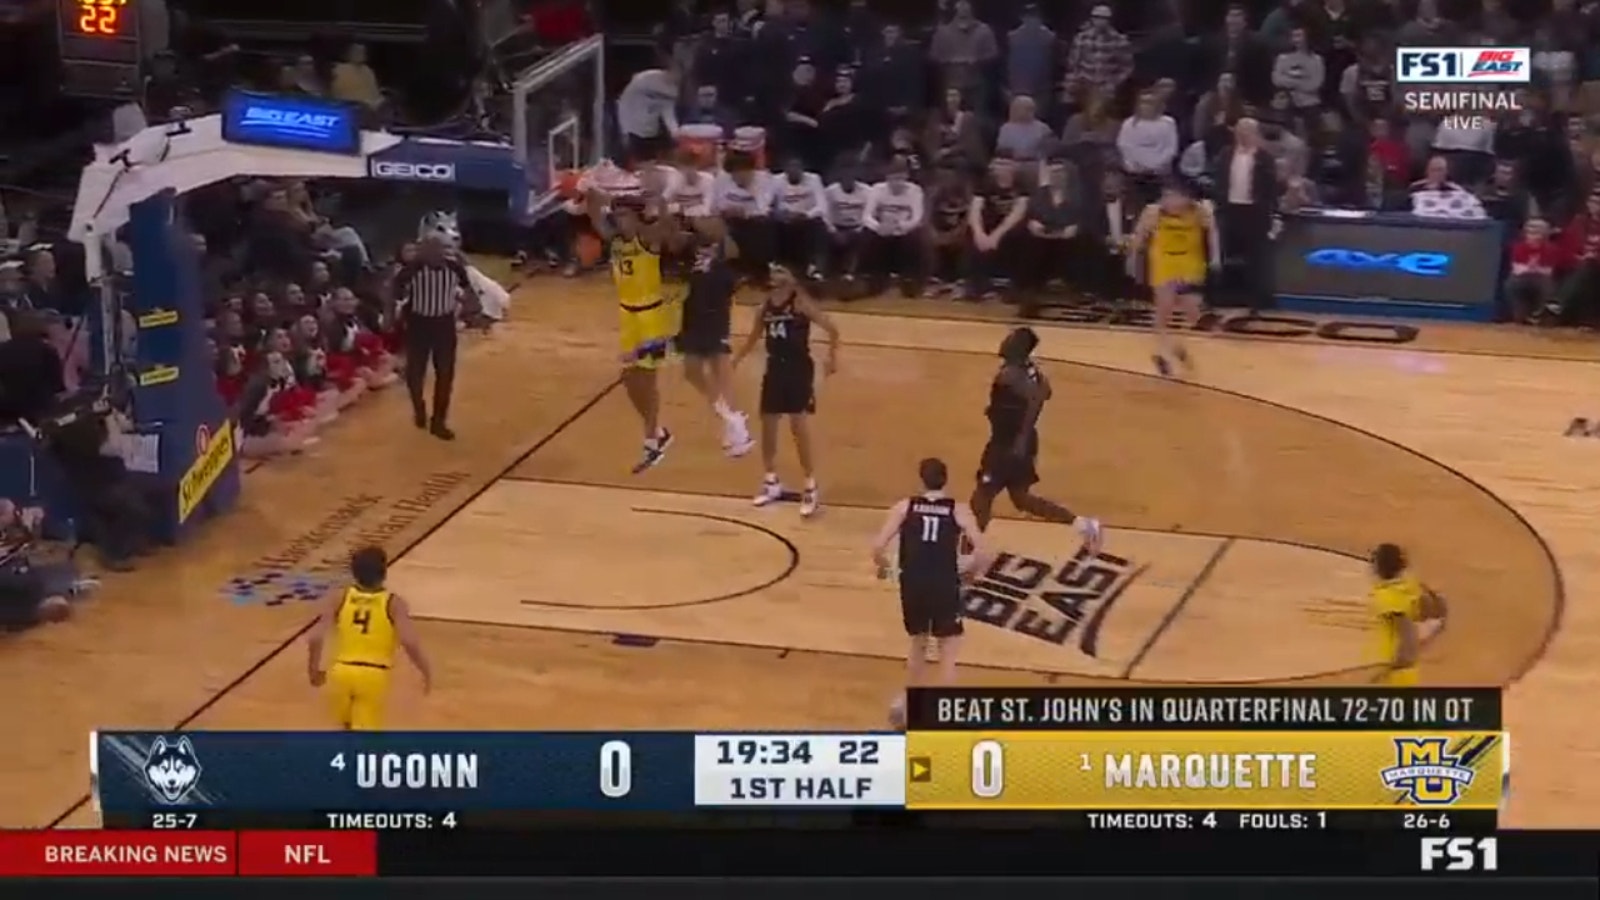 Marquette's Oso Ighodaro opens Big East semis with a spectacular slam